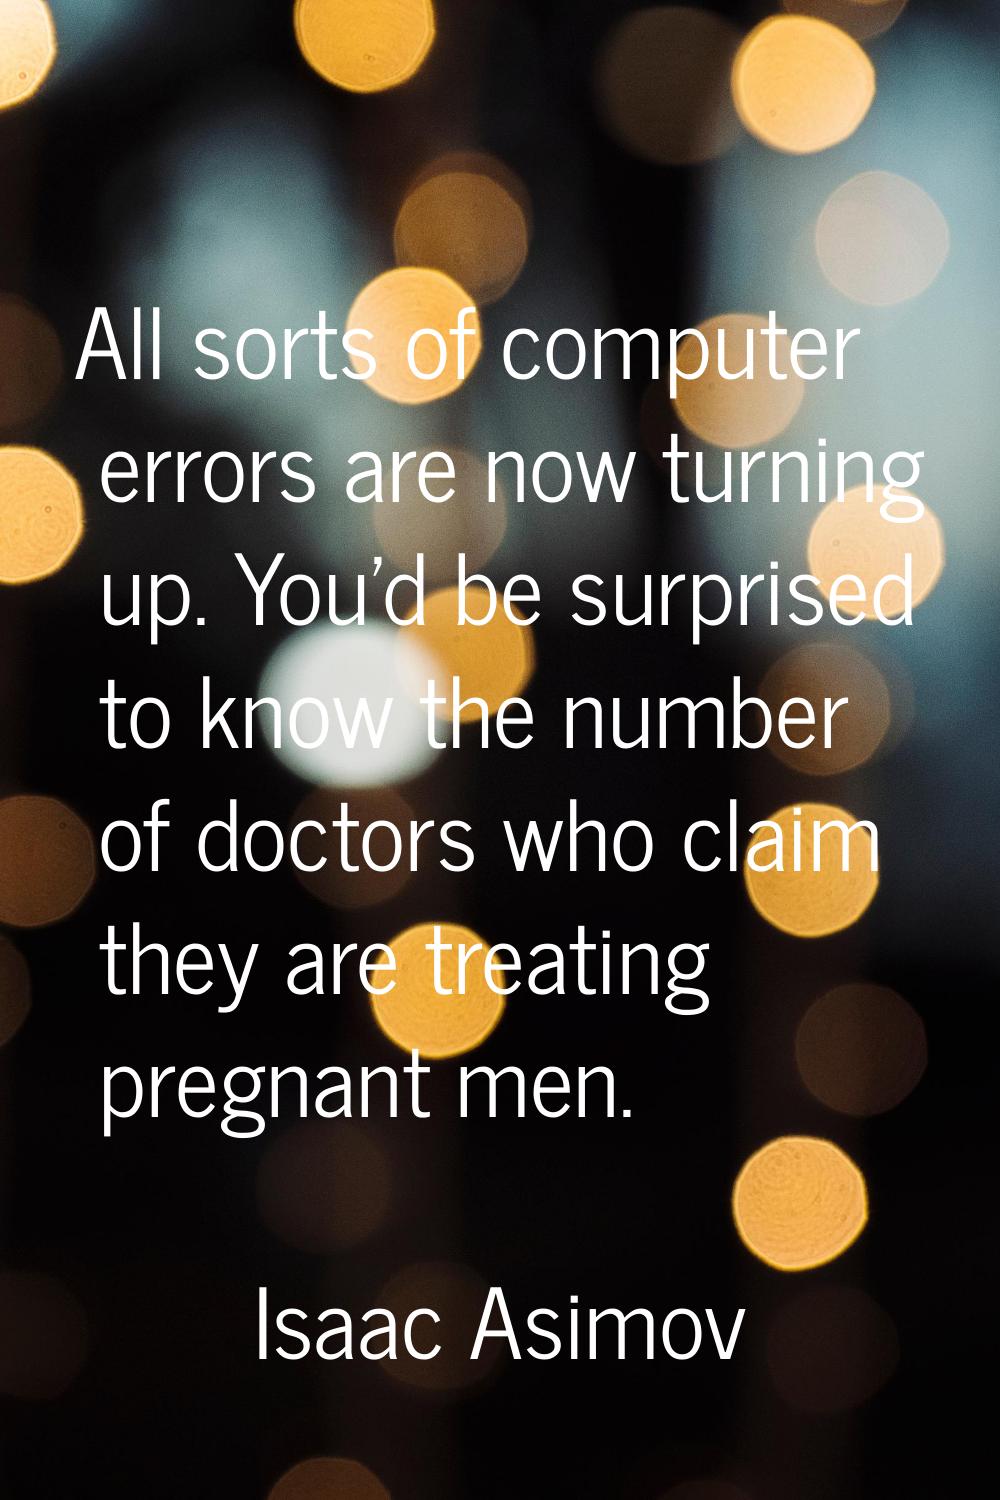 All sorts of computer errors are now turning up. You'd be surprised to know the number of doctors w